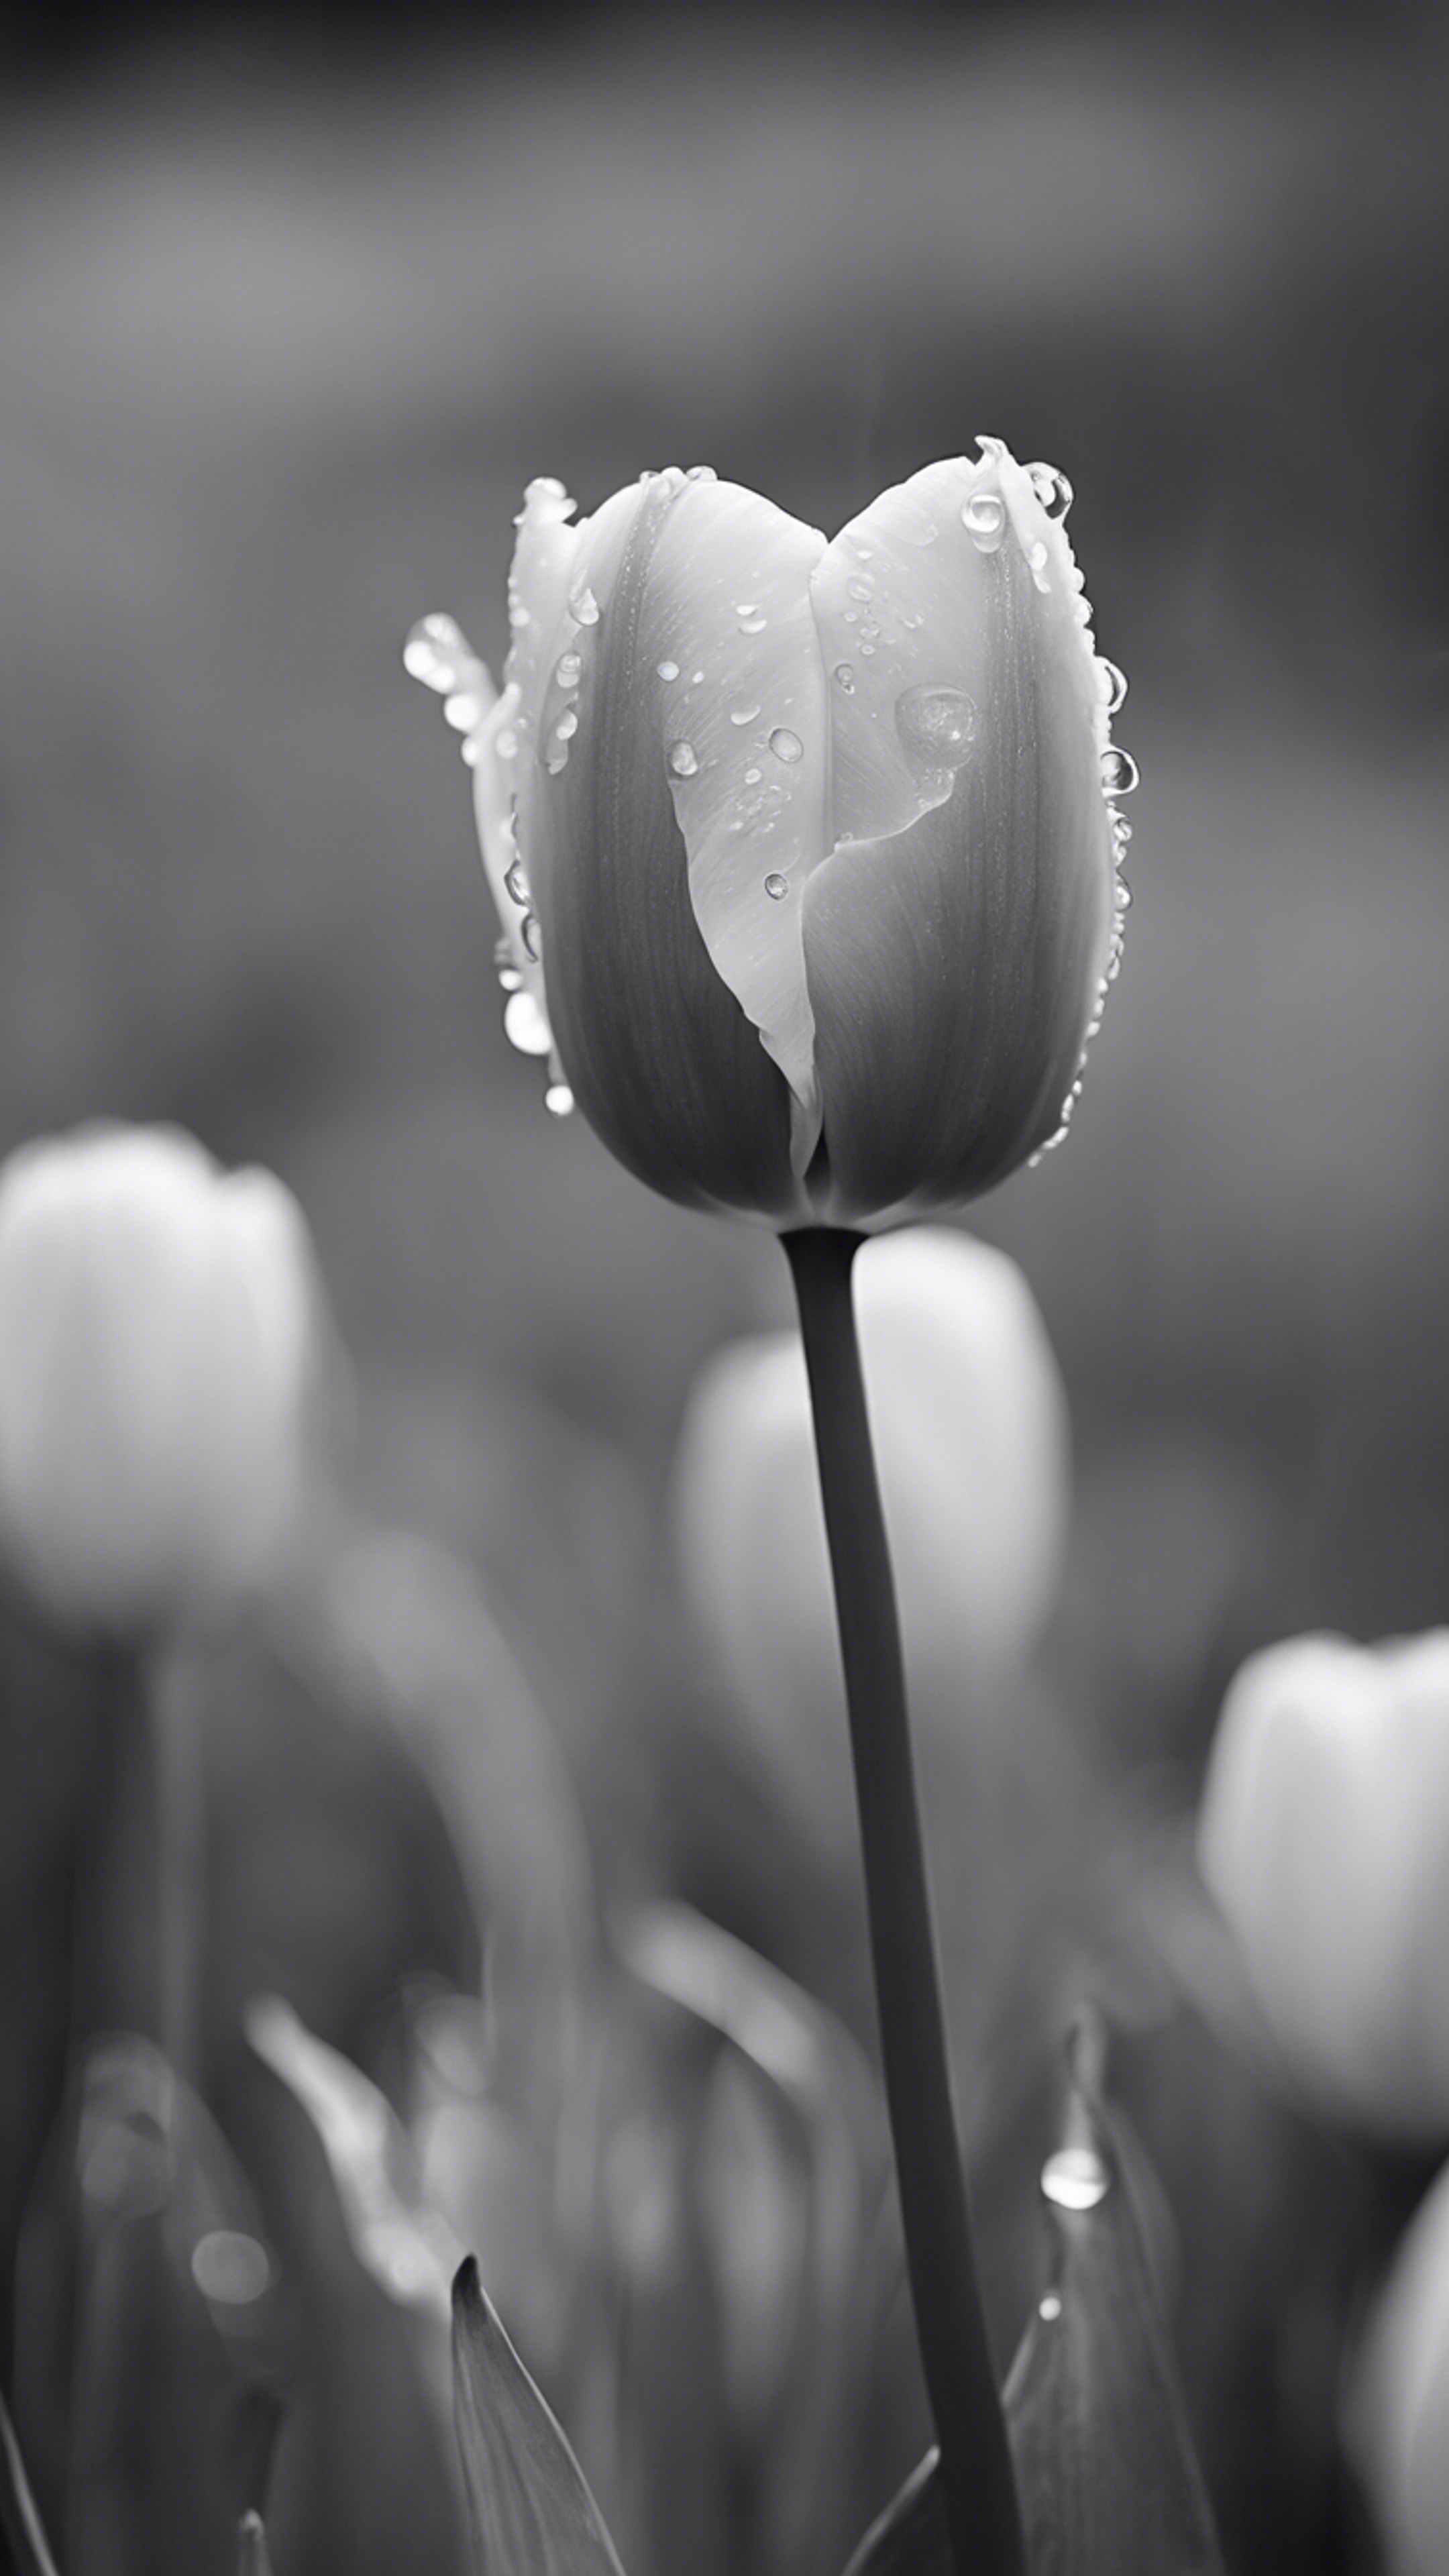 A black-and-white photograph of a tulip in full bloom in the rain. Tapeta[646ce87a121a4320b6e6]